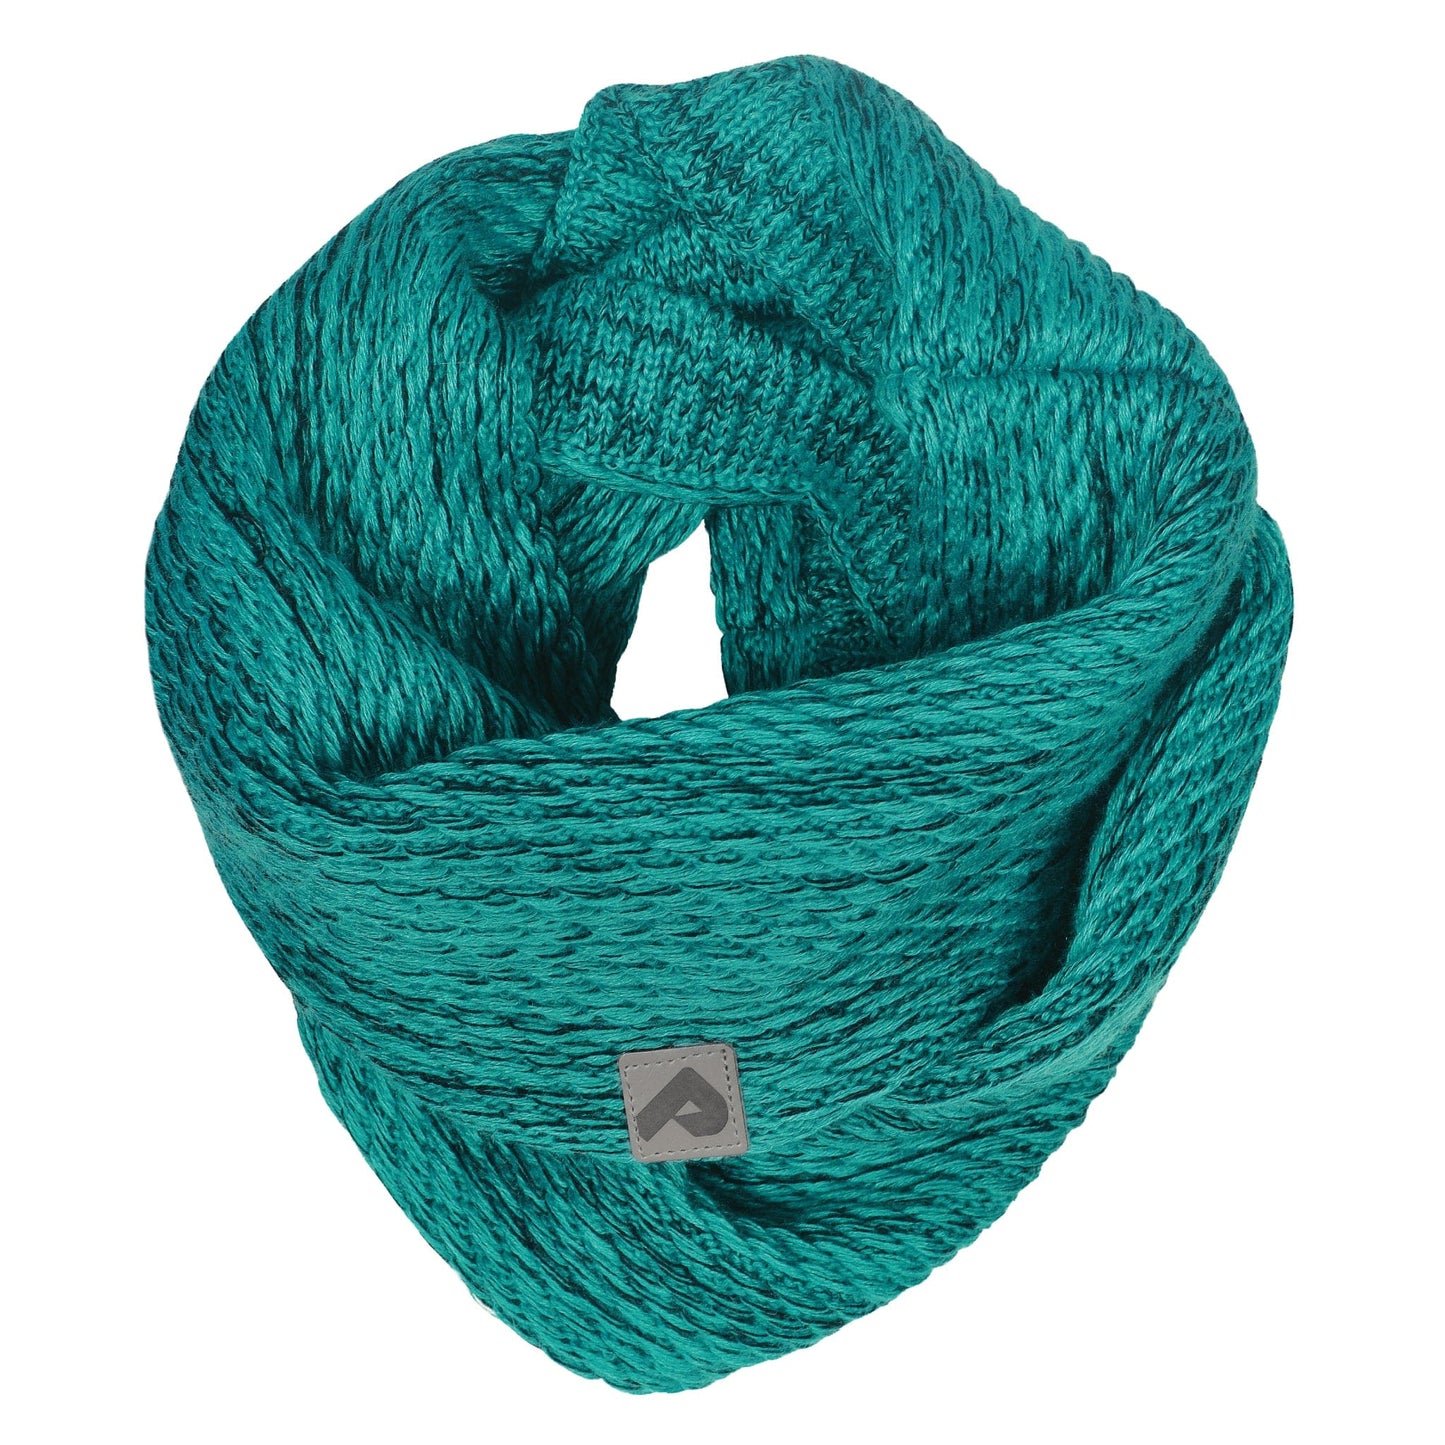 Knitted infinity scarf - Canard